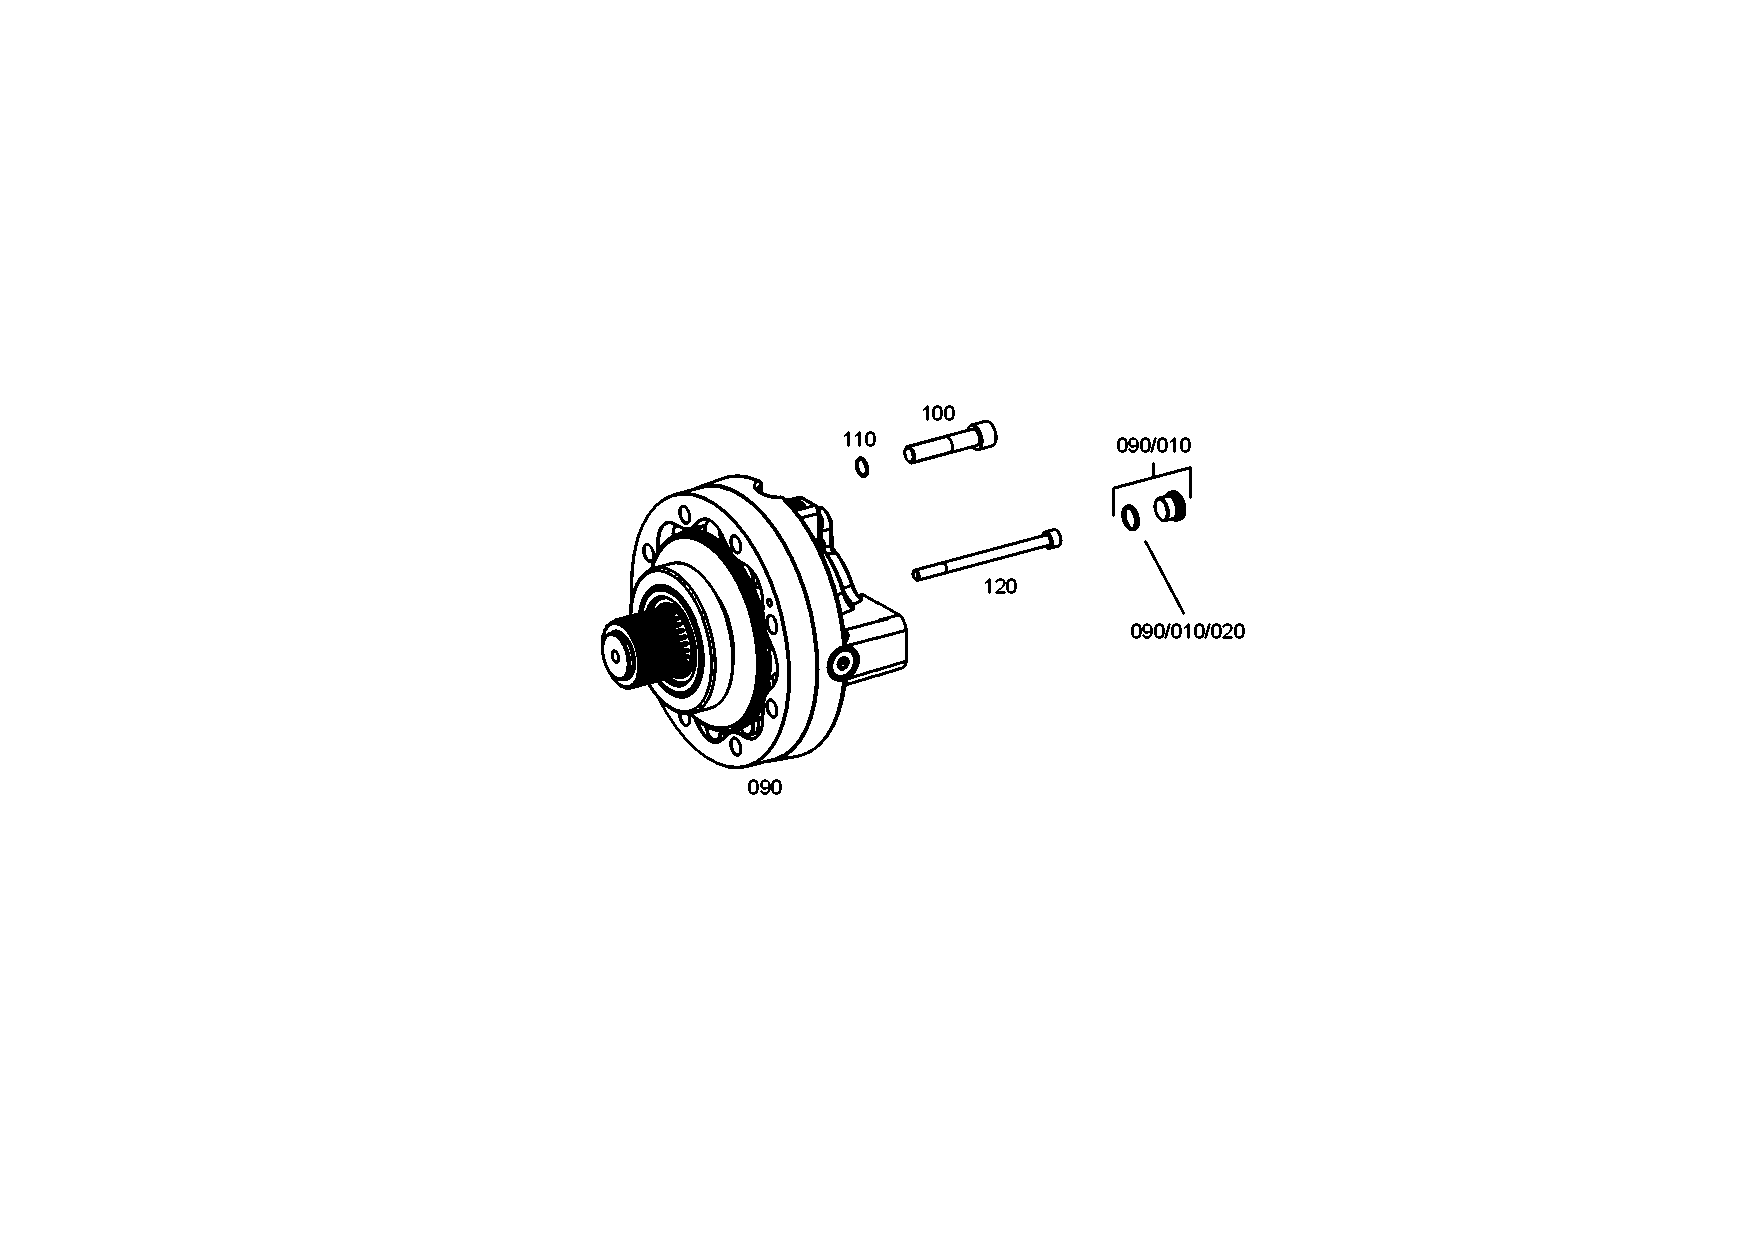 drawing for STETTER 98353975 - HYDRAULIC MOTOR (figure 1)